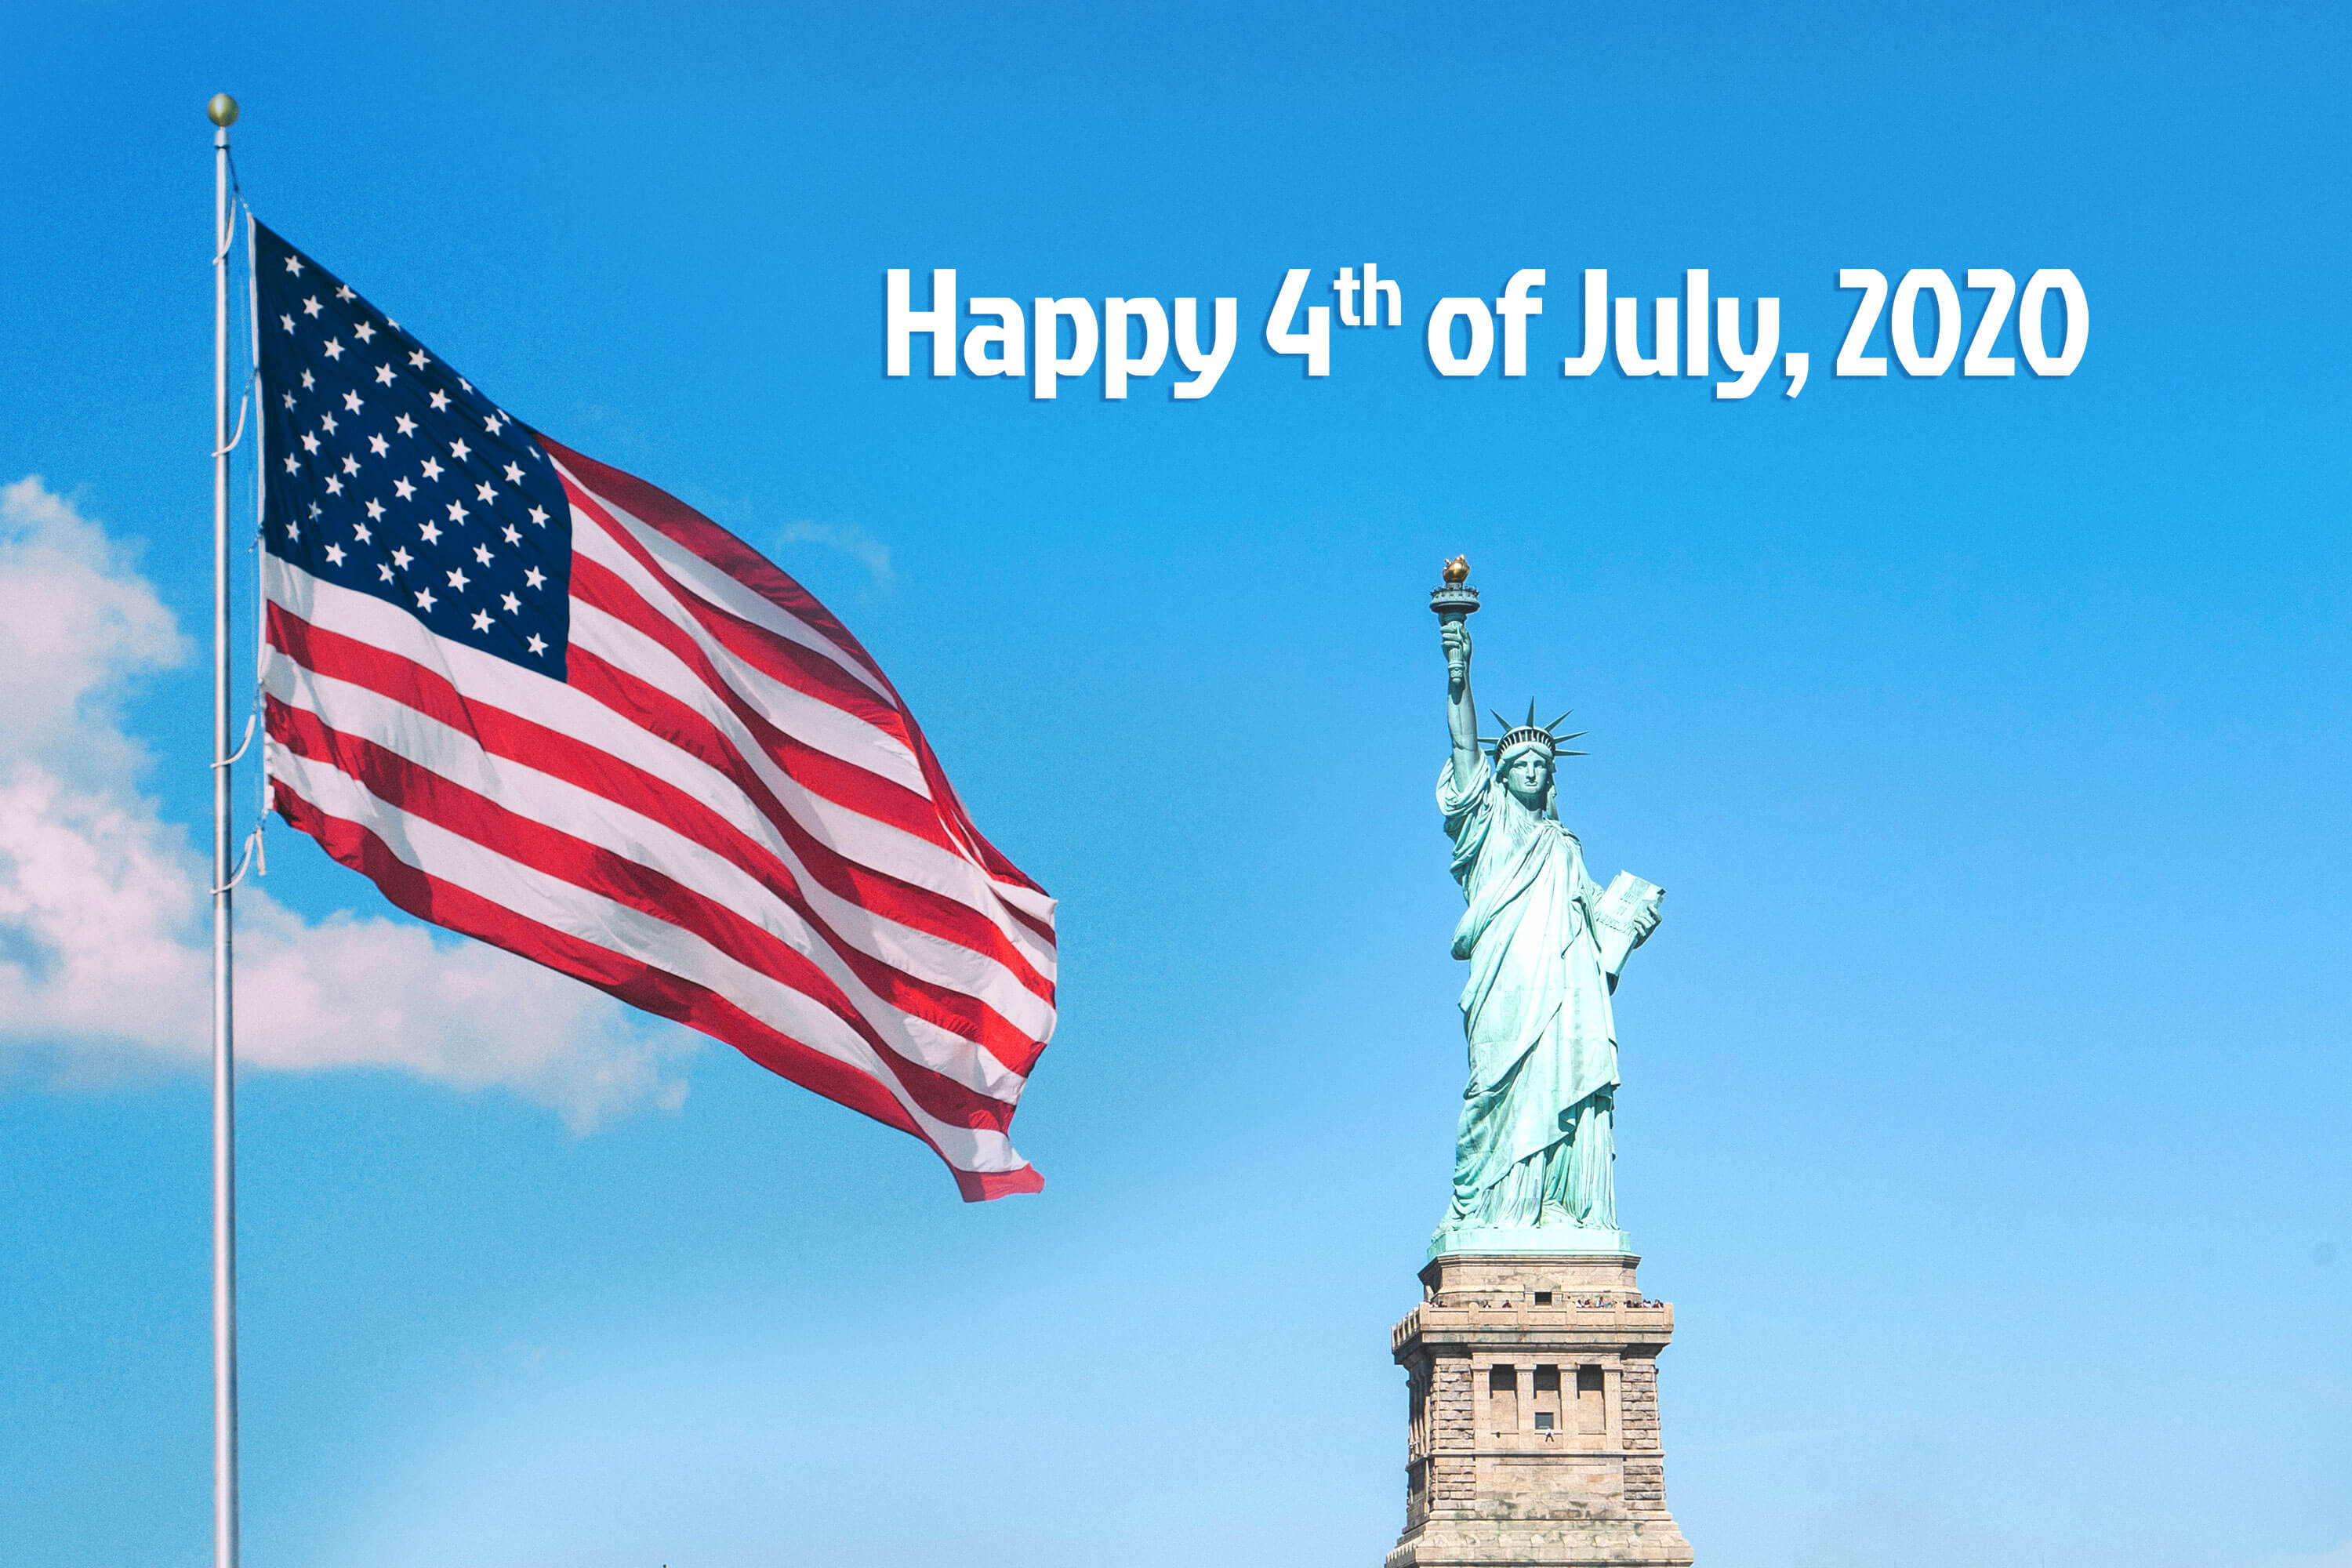 20+ Happy 4th of July Independence Day USA 2020 Image.